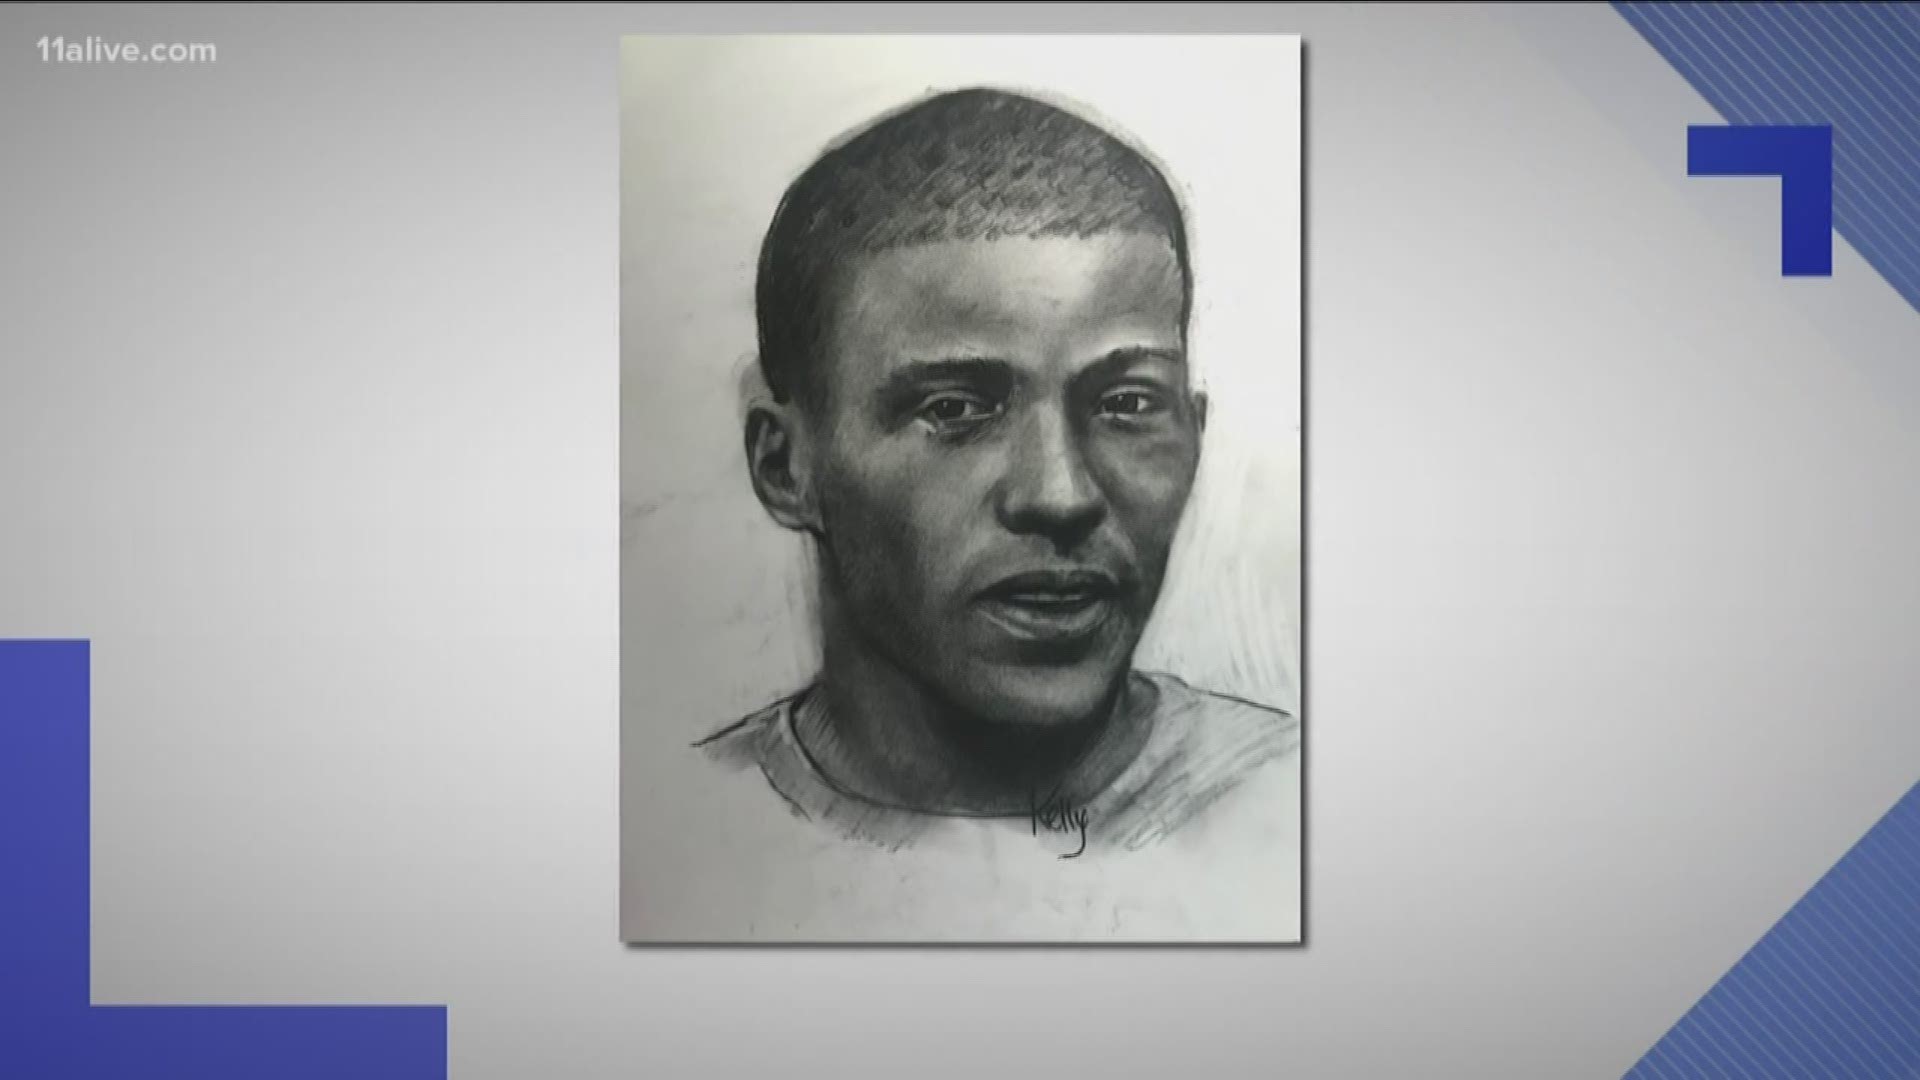 Police just released a sketch of the man in hopes of finding him.